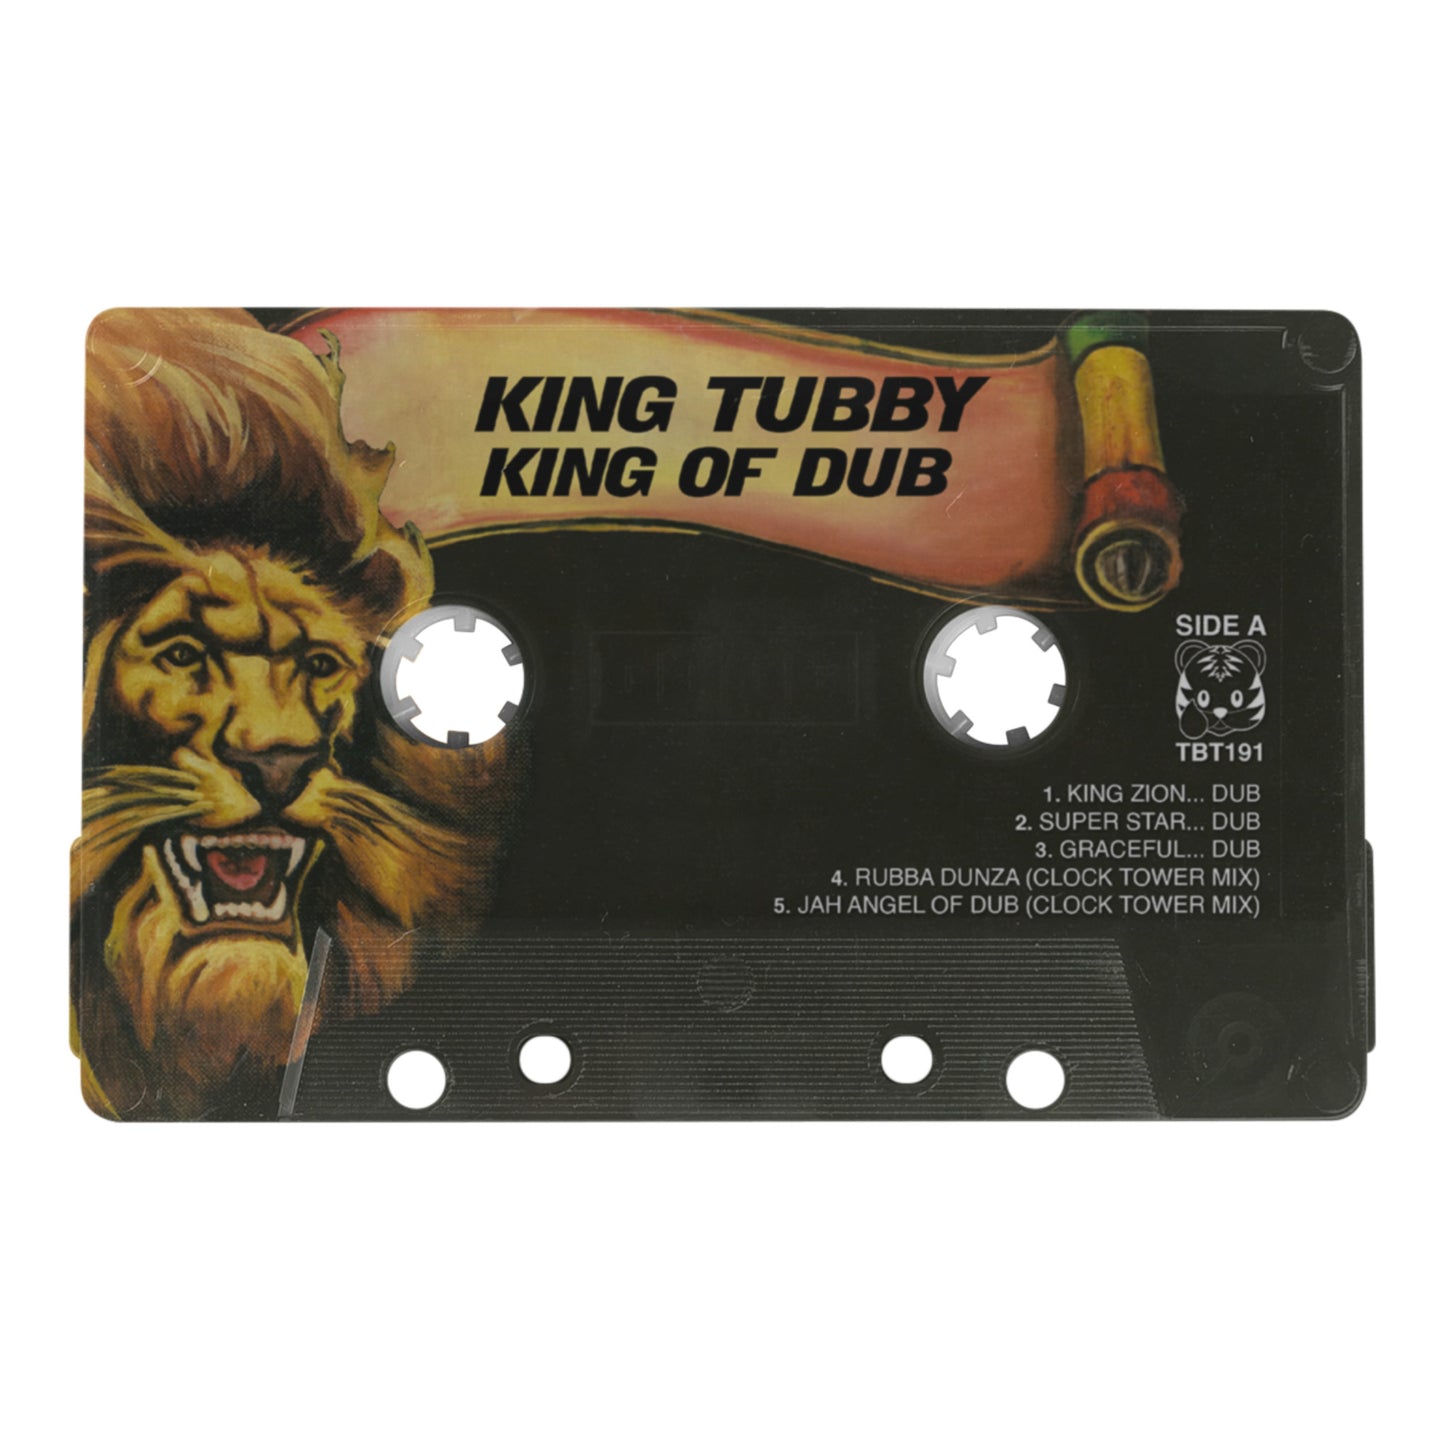 King Tubby - "King of Dub" Limited Edition Cassette Tape